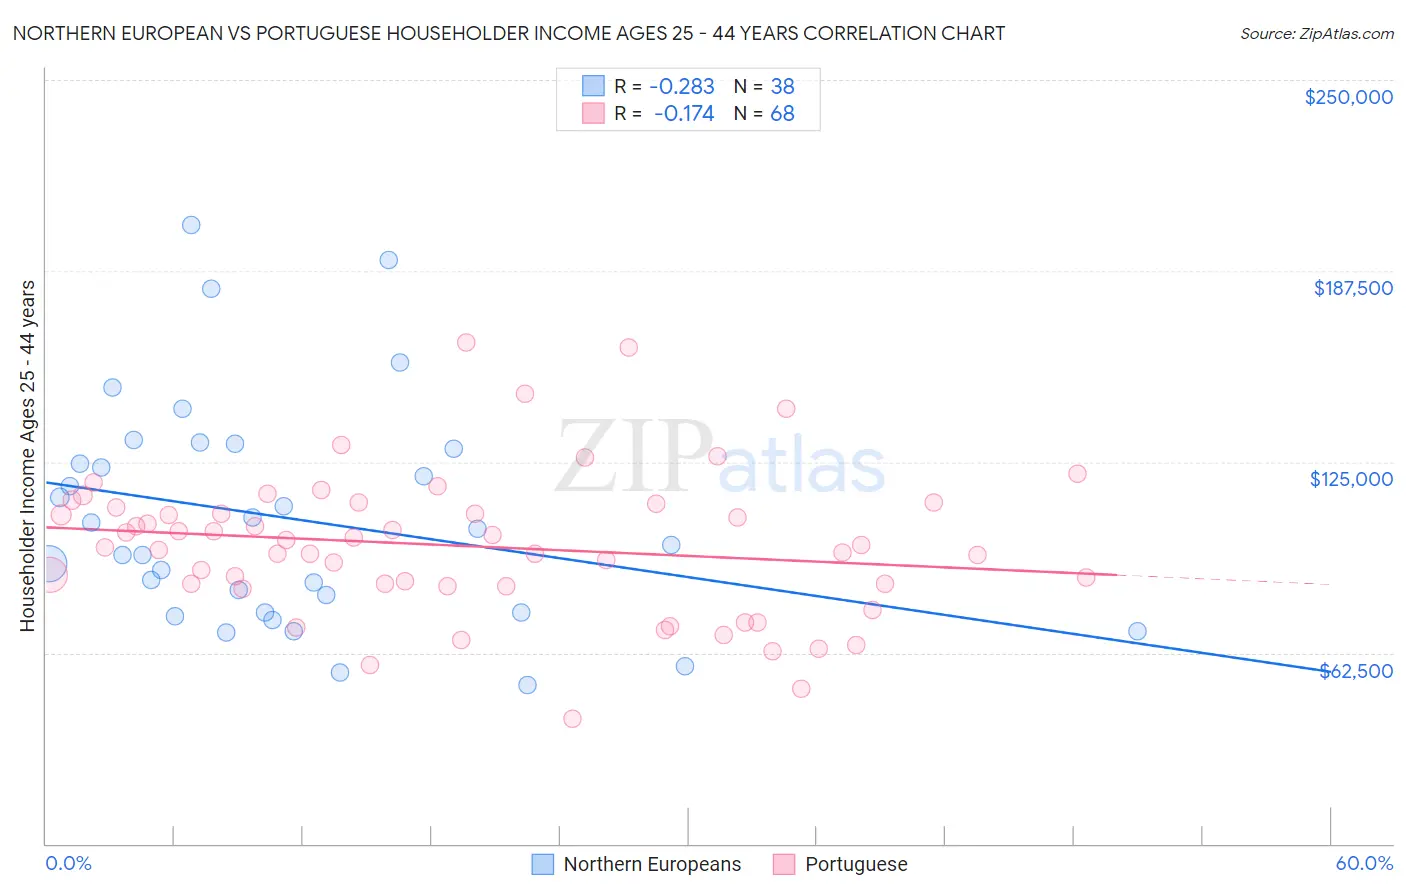 Northern European vs Portuguese Householder Income Ages 25 - 44 years